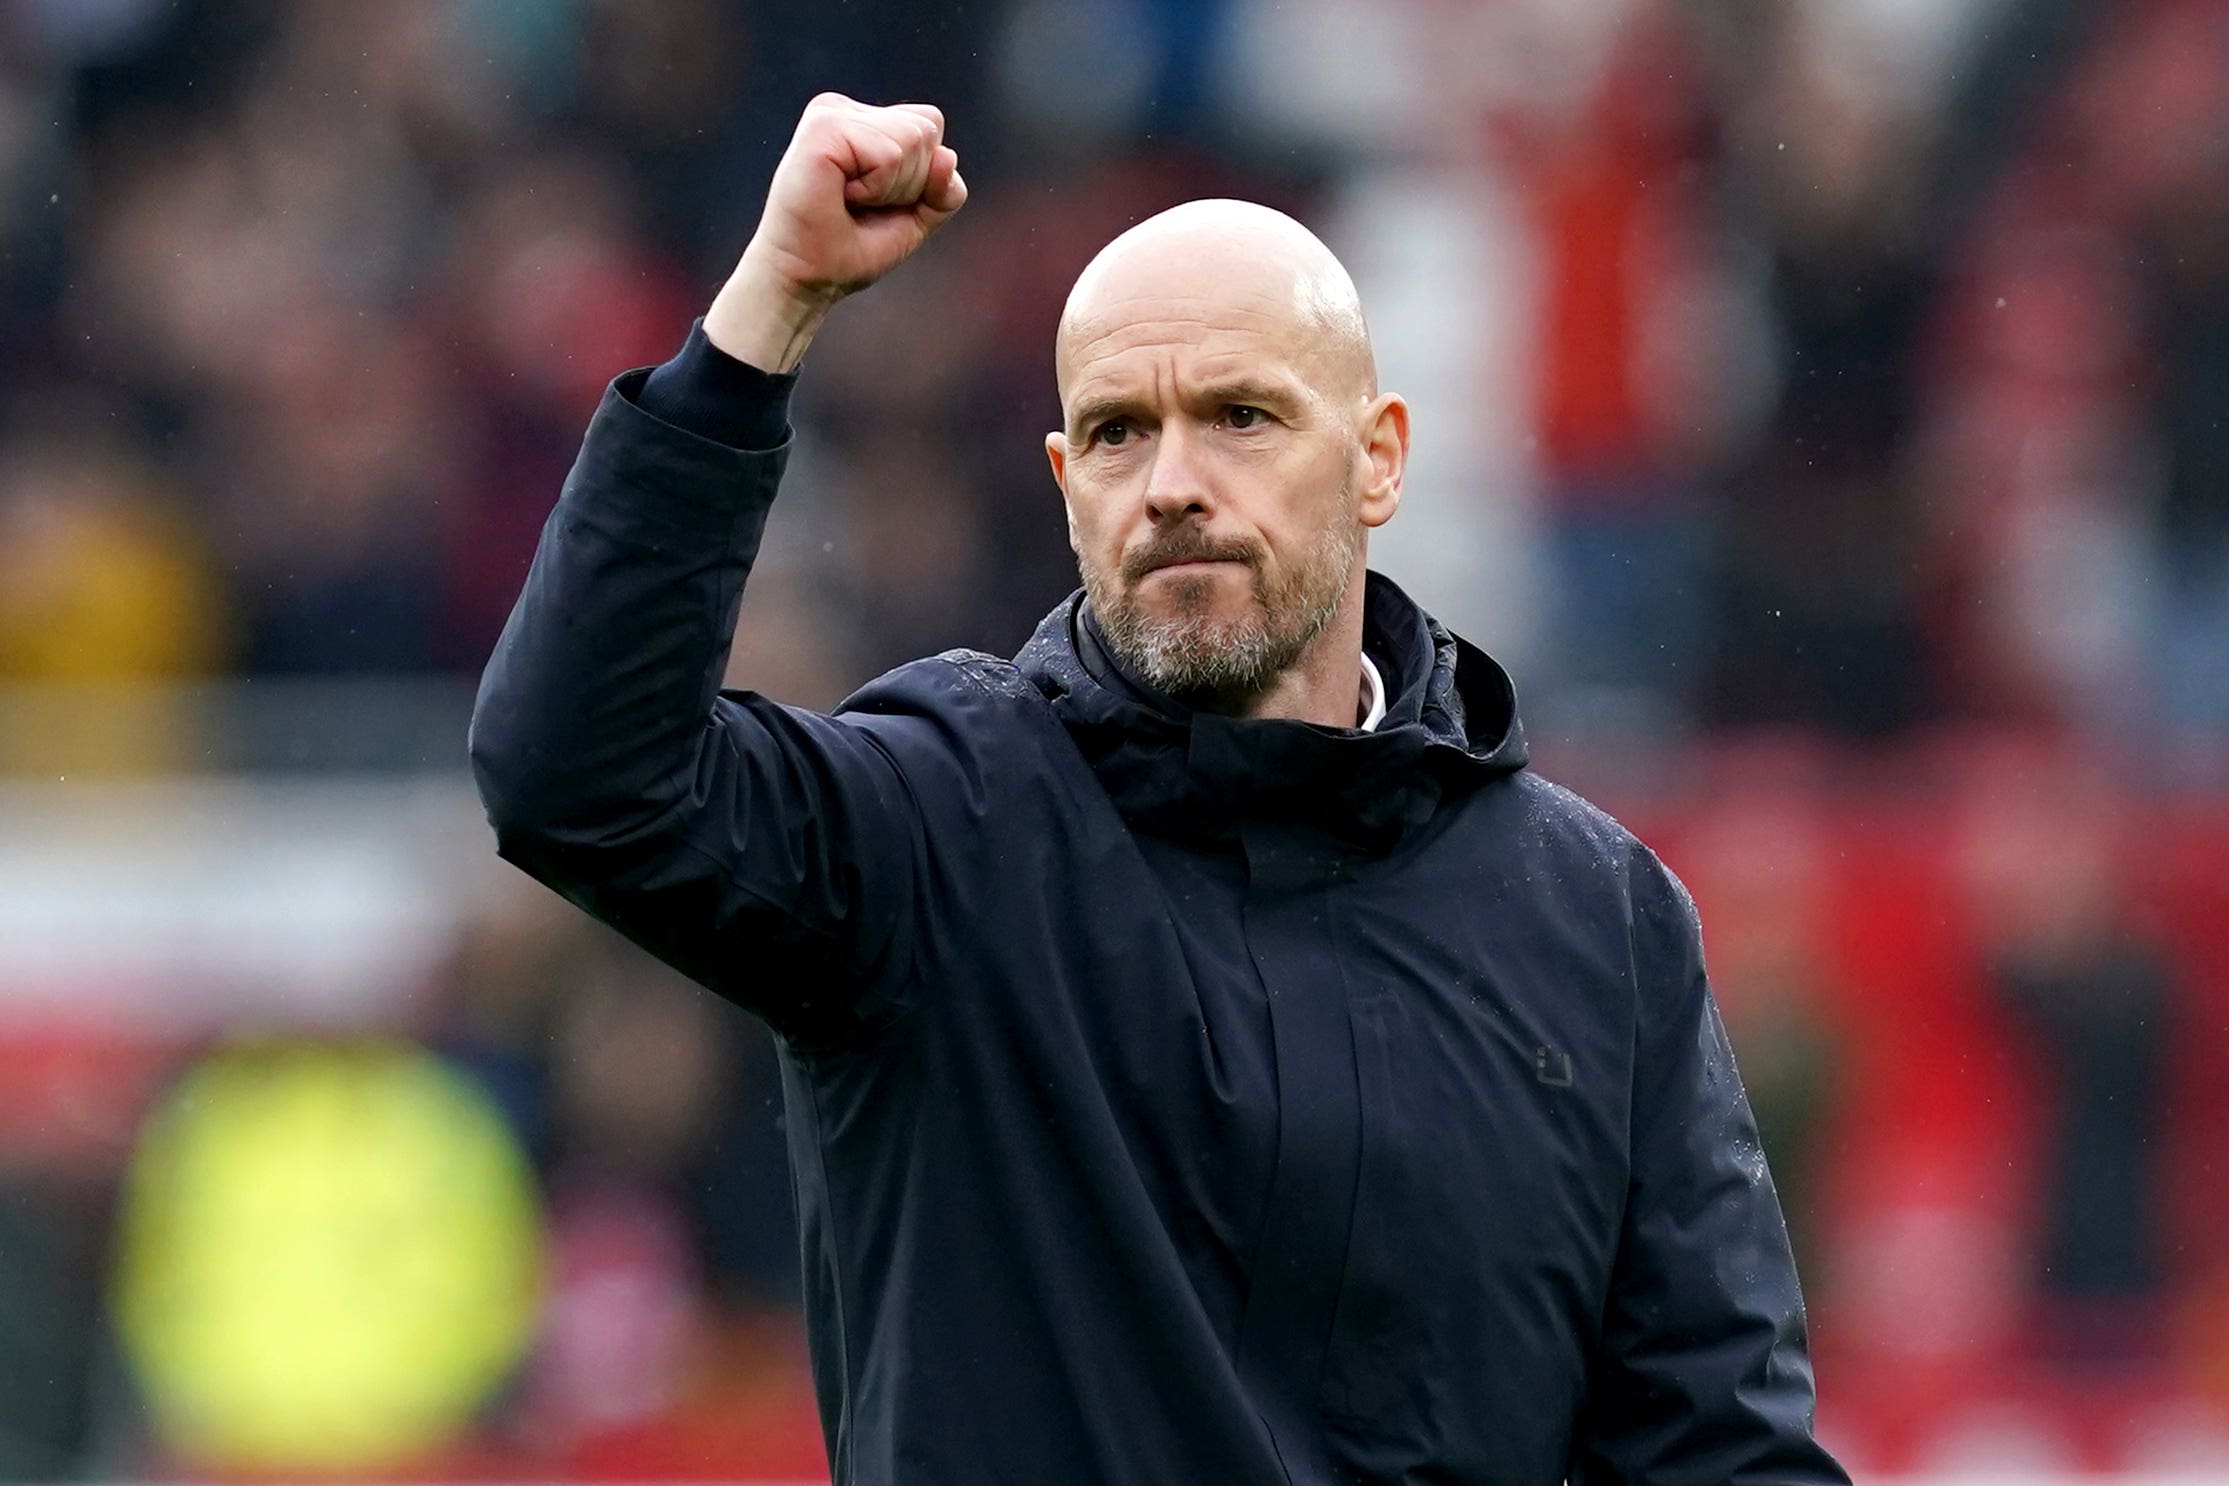  Erik ten Hag celebrates Manchester United's FA Cup win by punching the air.